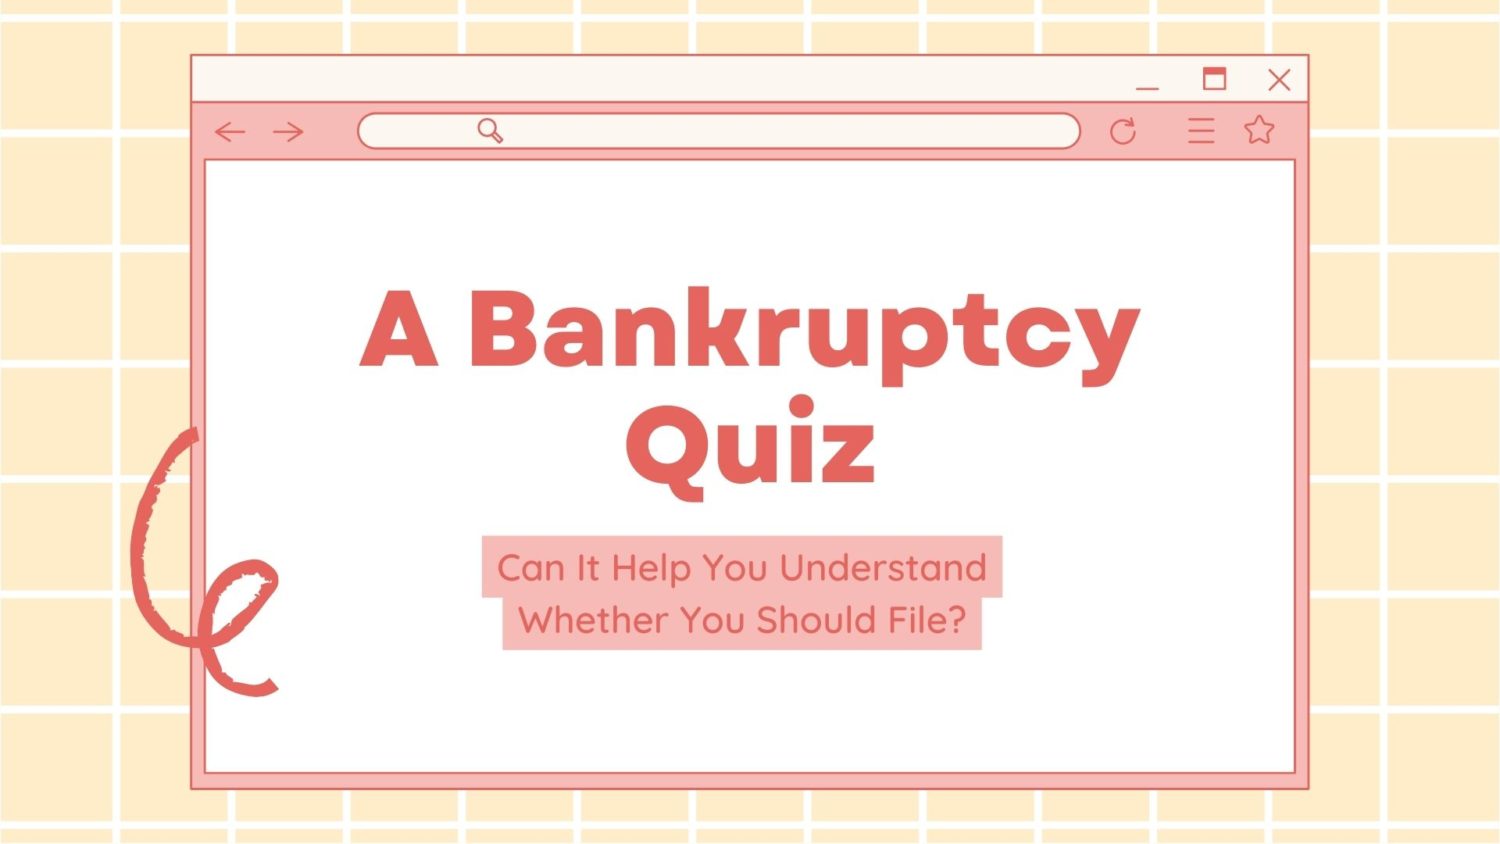 Can A Quiz Help You Understand Whether You Should File Bankruptcy?